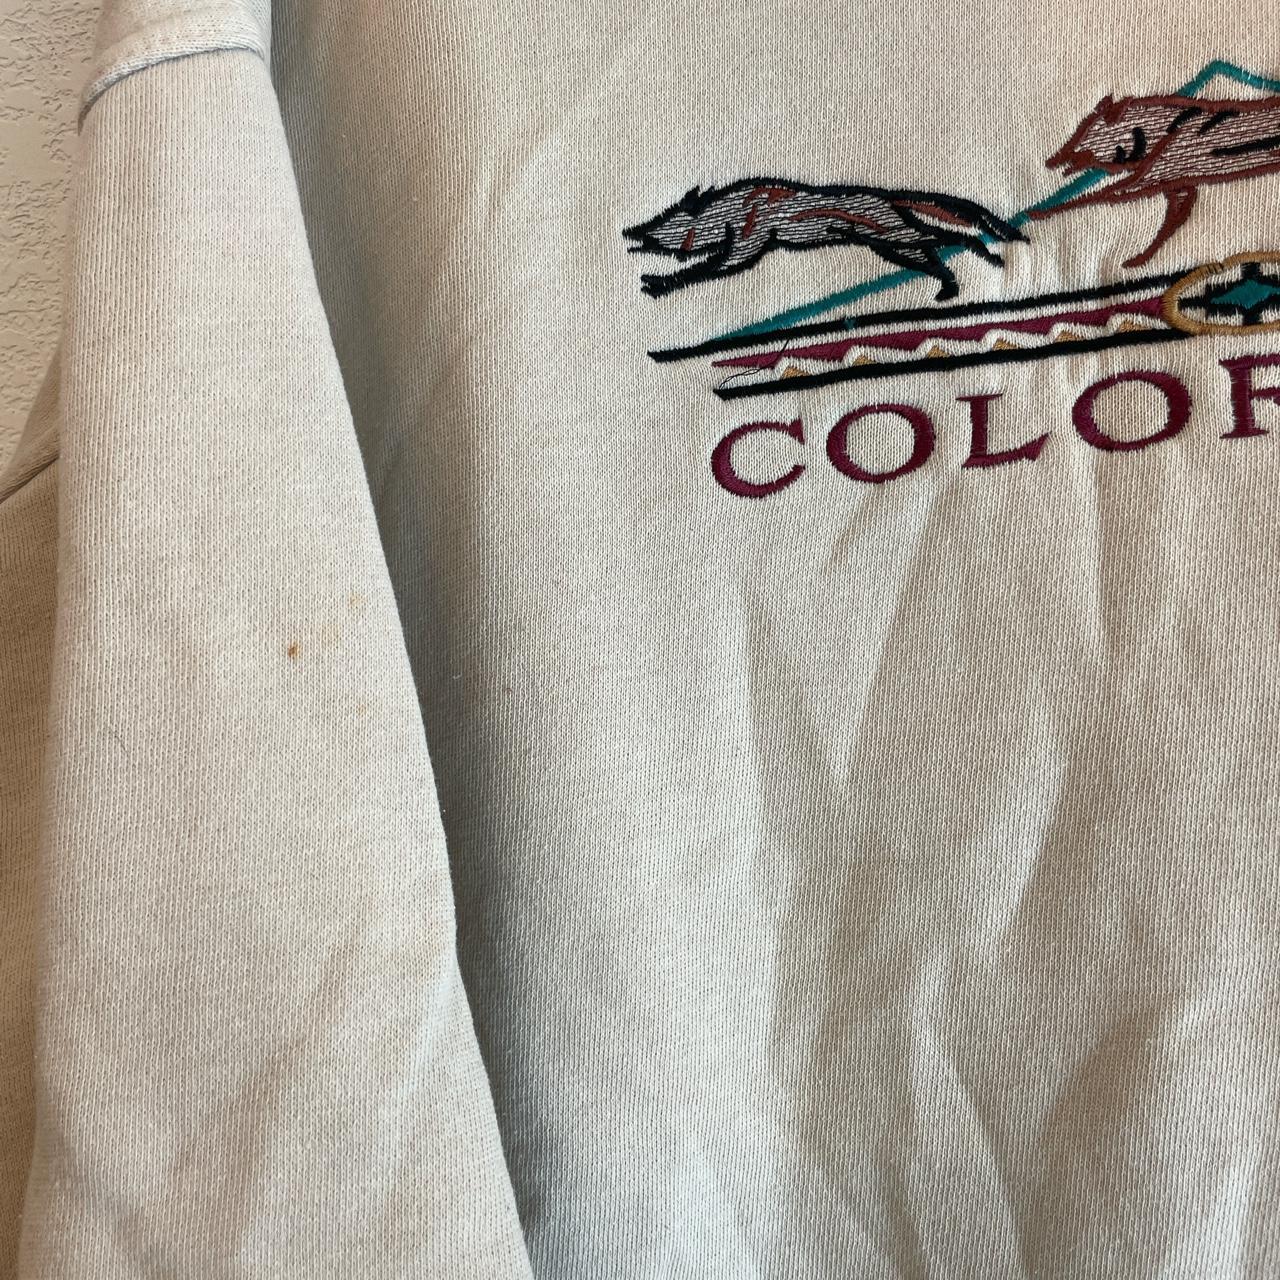 Colorado crew Some stains shown in photos... - Depop